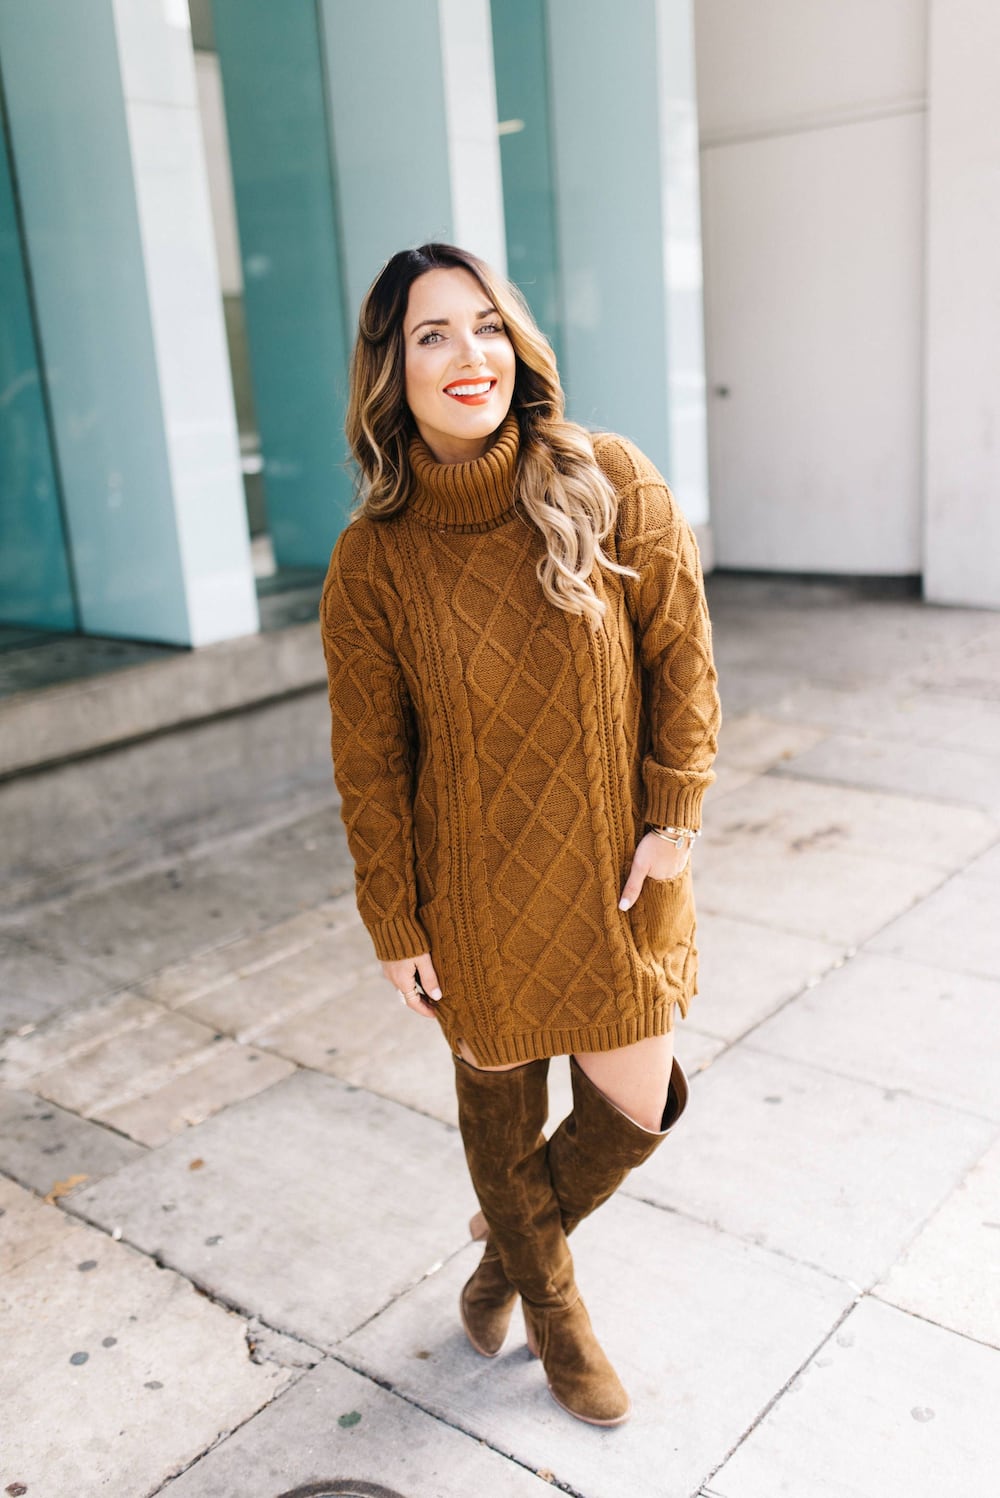 What to wear with brown knee-high boots